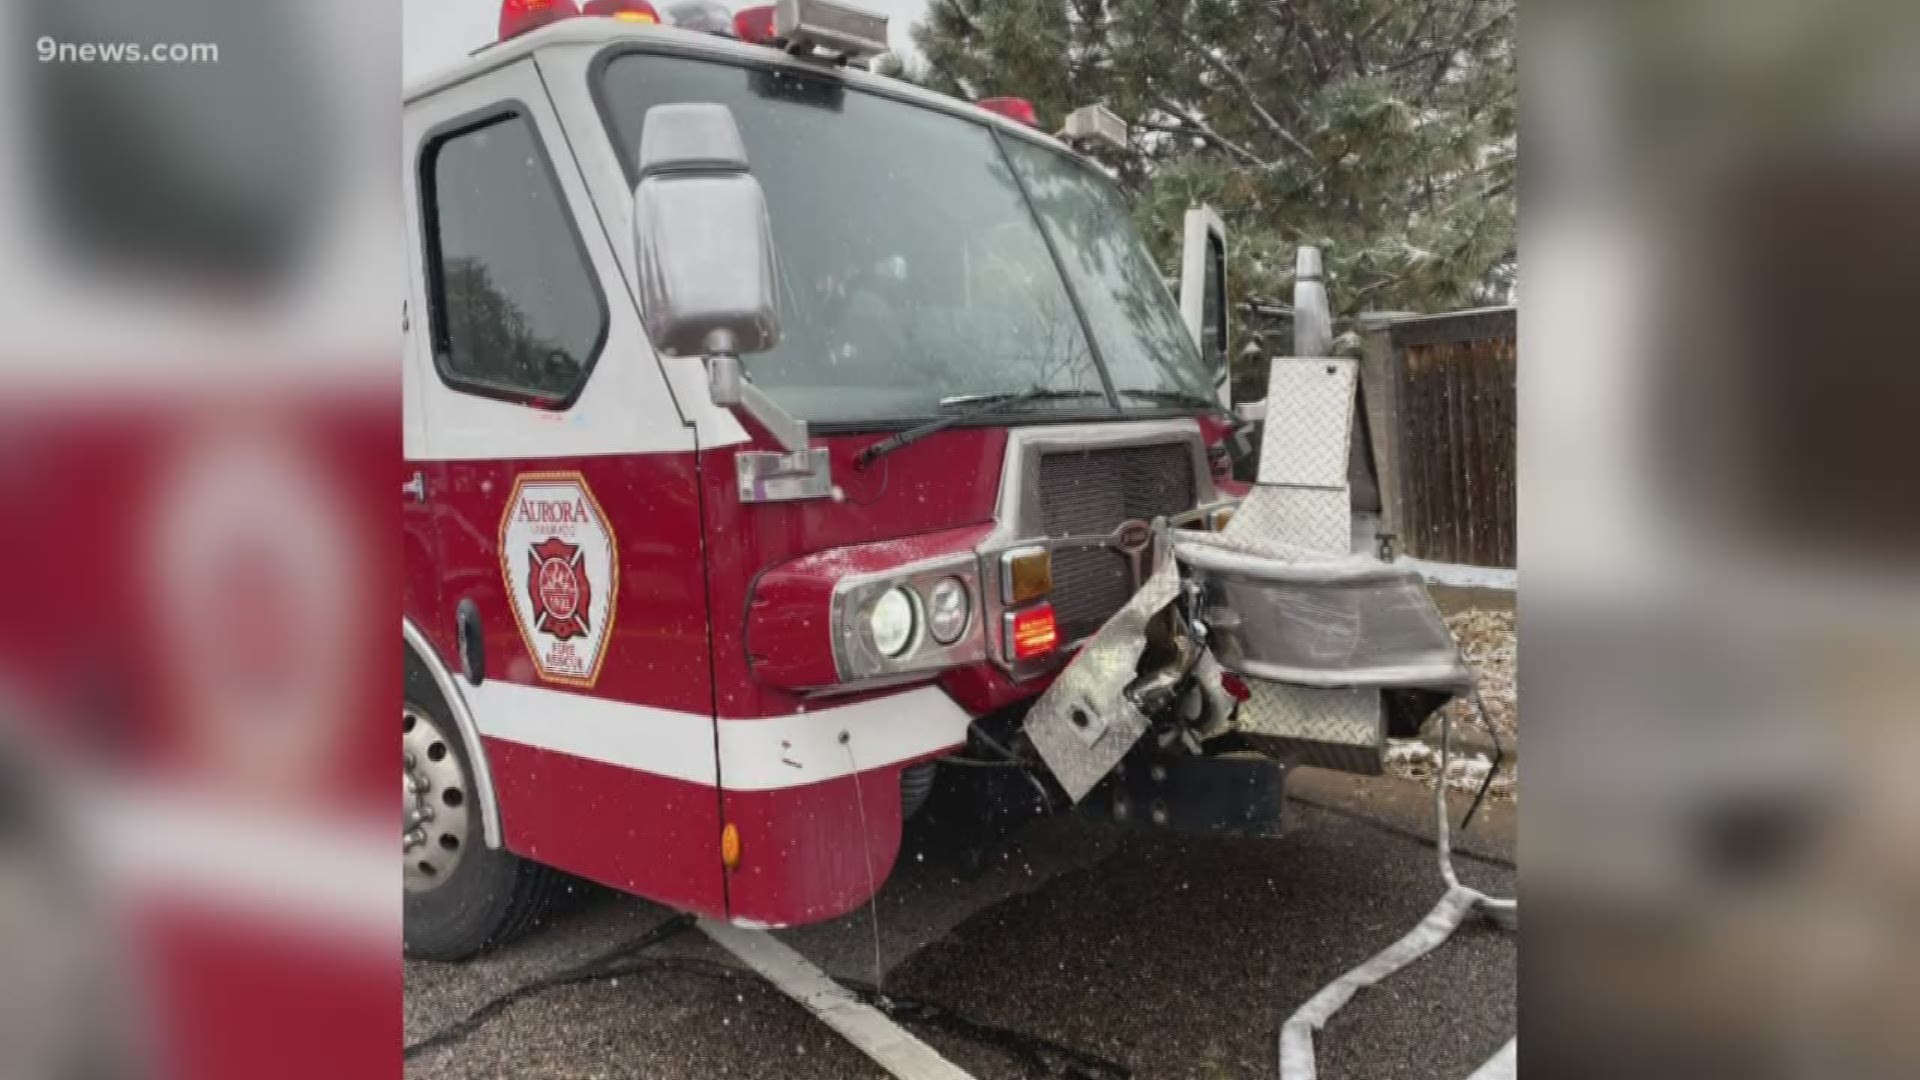 The truck was responding to a medical emergency when the crash happened Sunday afternoon, Aurora Fire Rescue said.